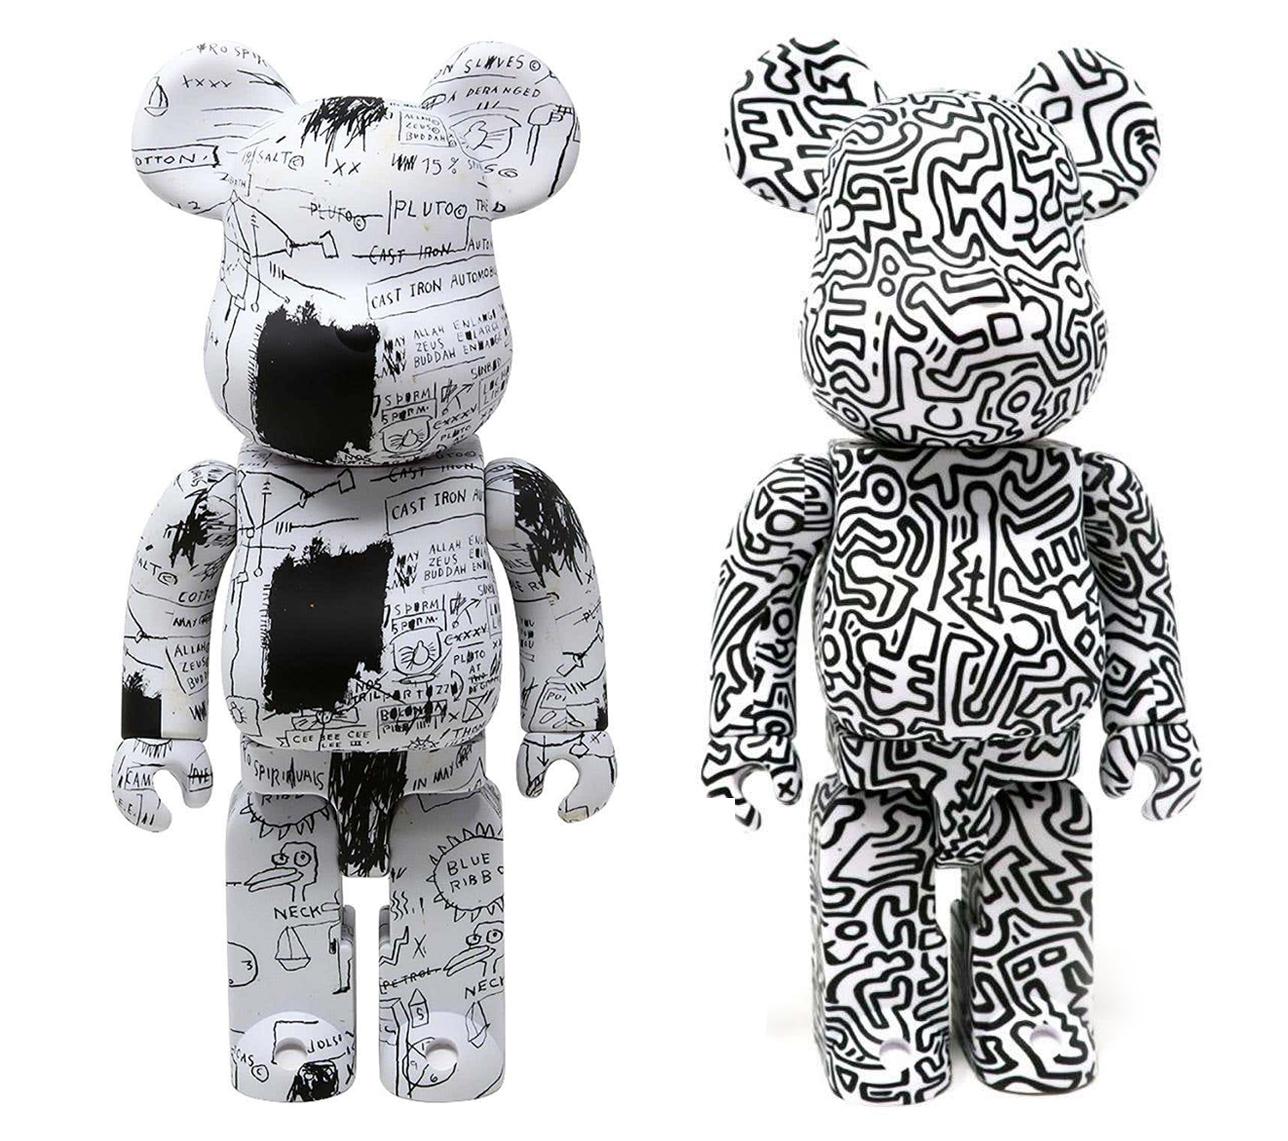 after Jean-Michel Basquiat Abstract Sculpture - Basquiat Keith Haring 400% Bearbrick set (Basquiat Haring BE@RBRICK)